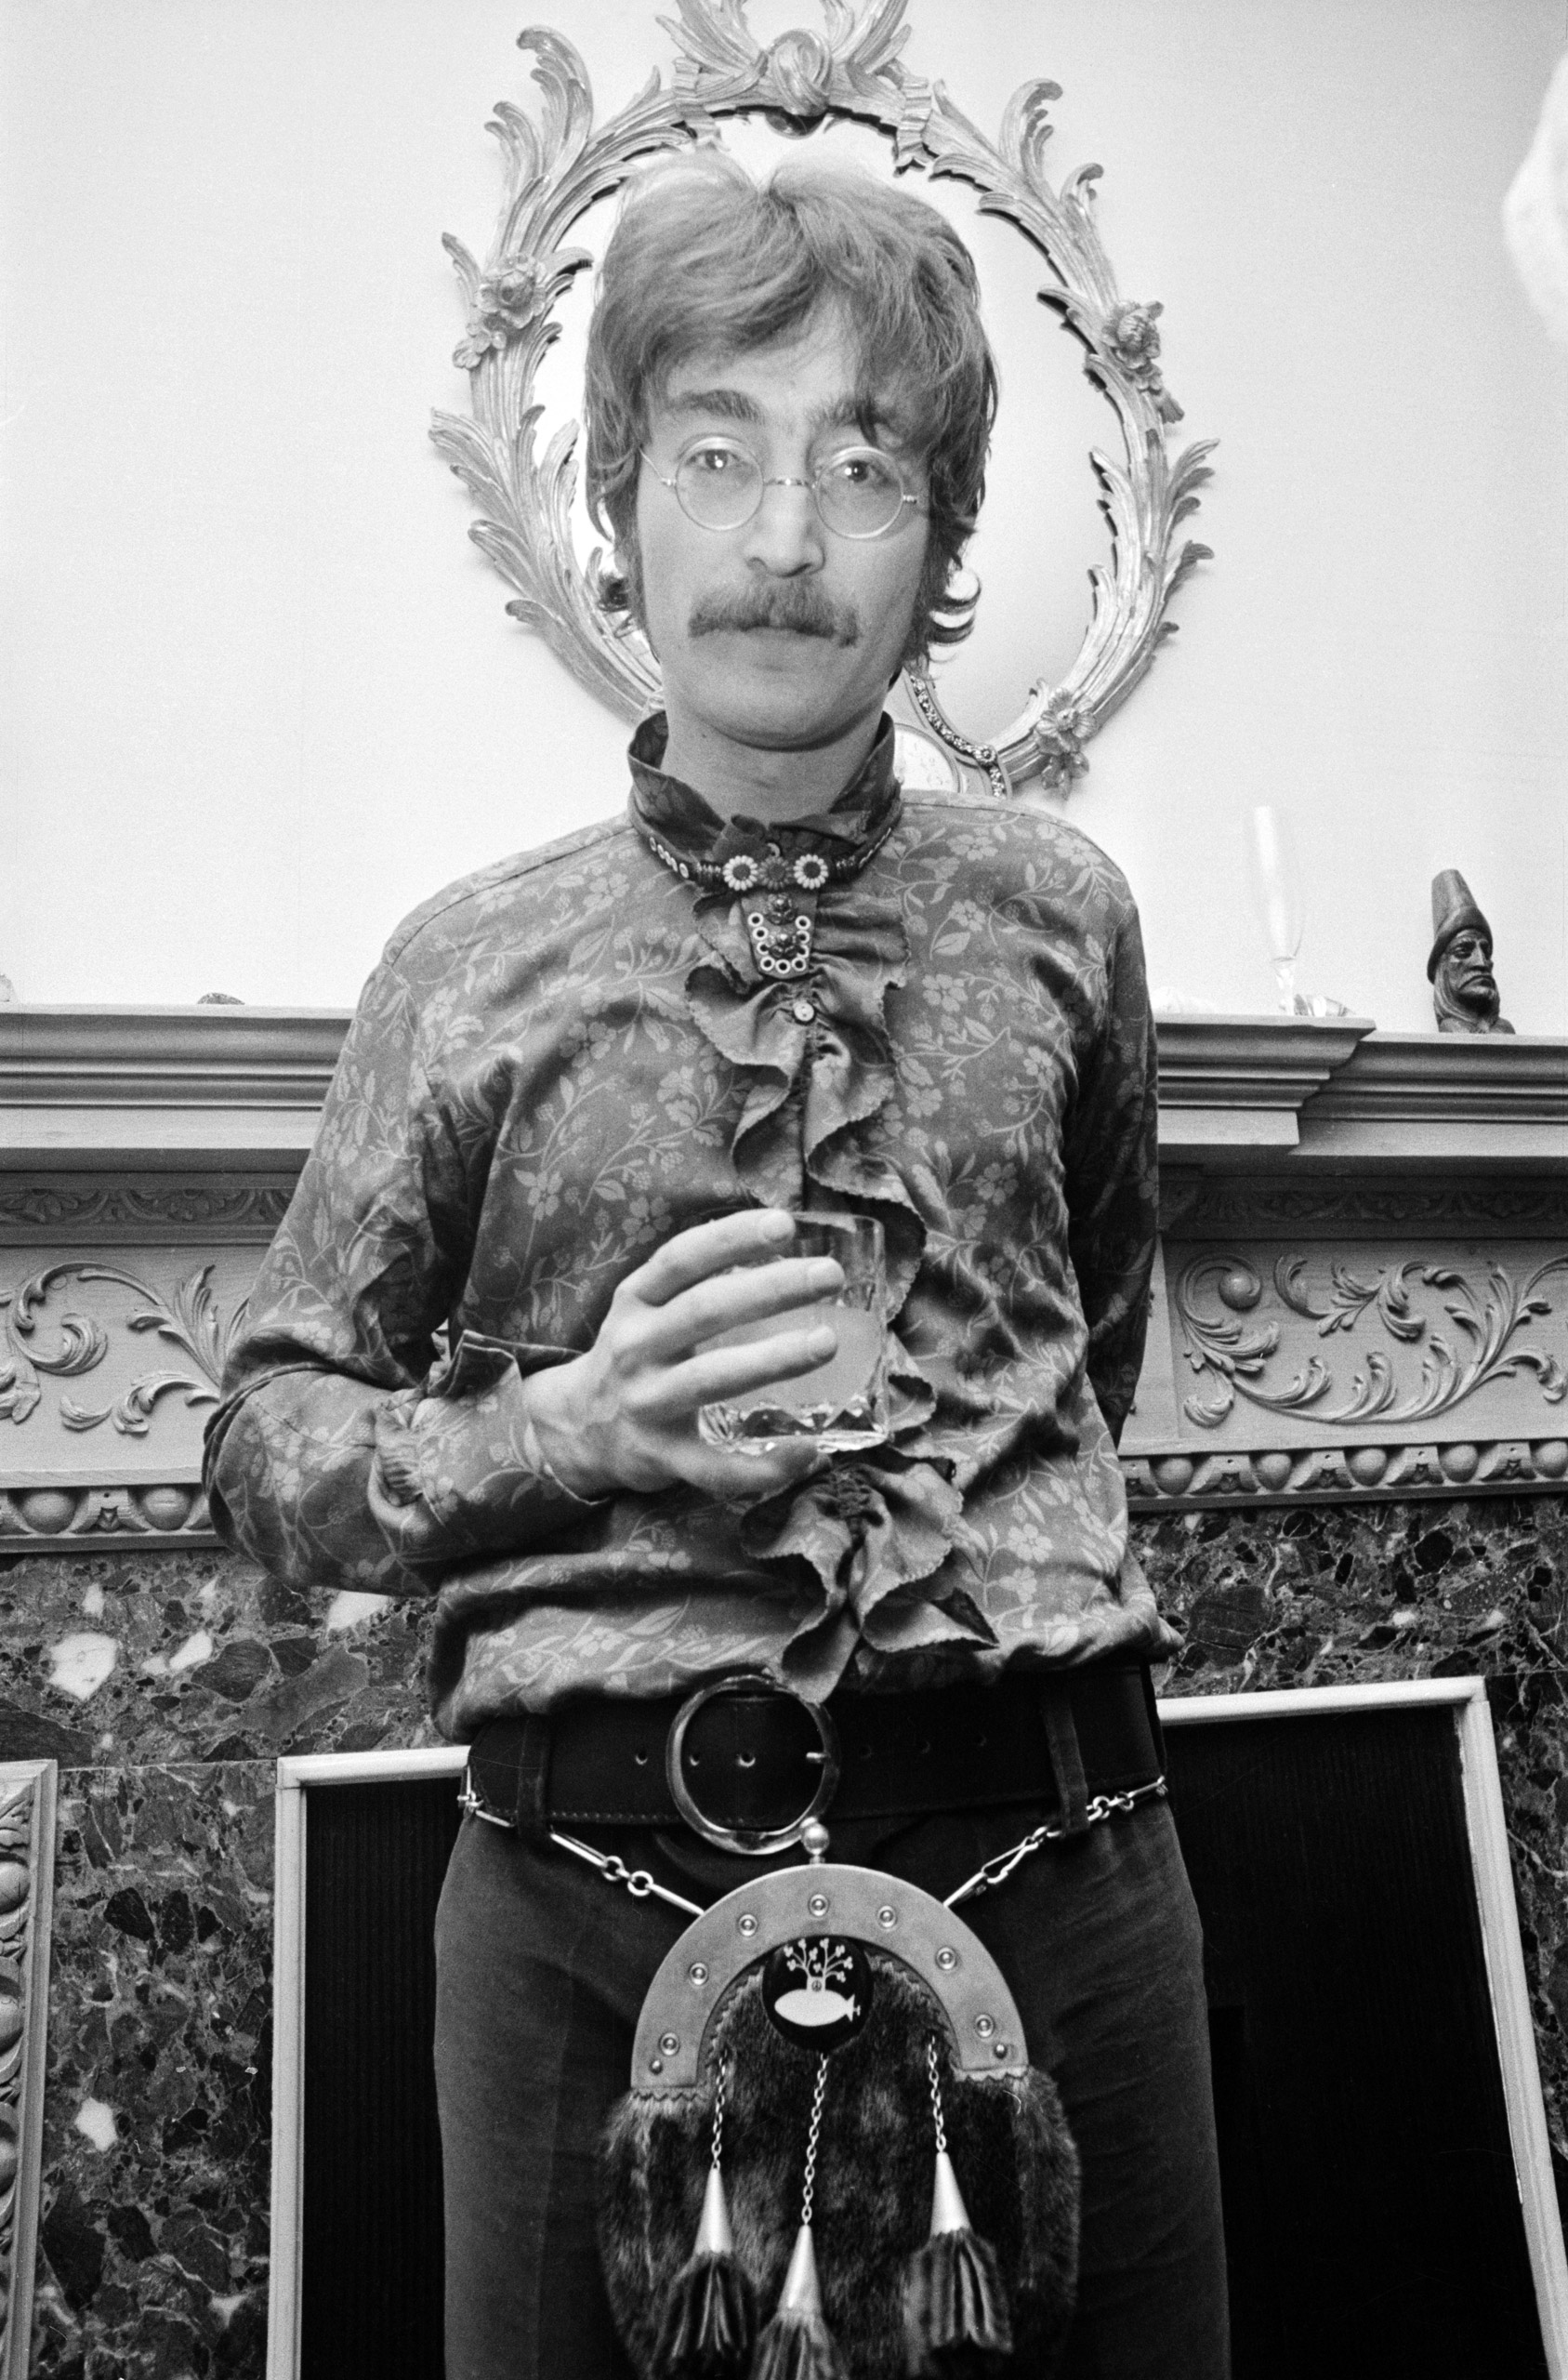 John Lennon wearing a frilly shirt and a sporran at the press launch for the Beatles' new album 'Sergeant Pepper's Lonely Hearts Club Band', held at Brian Epstein's house at 24 Chapel Street, London, May 19, 1967.